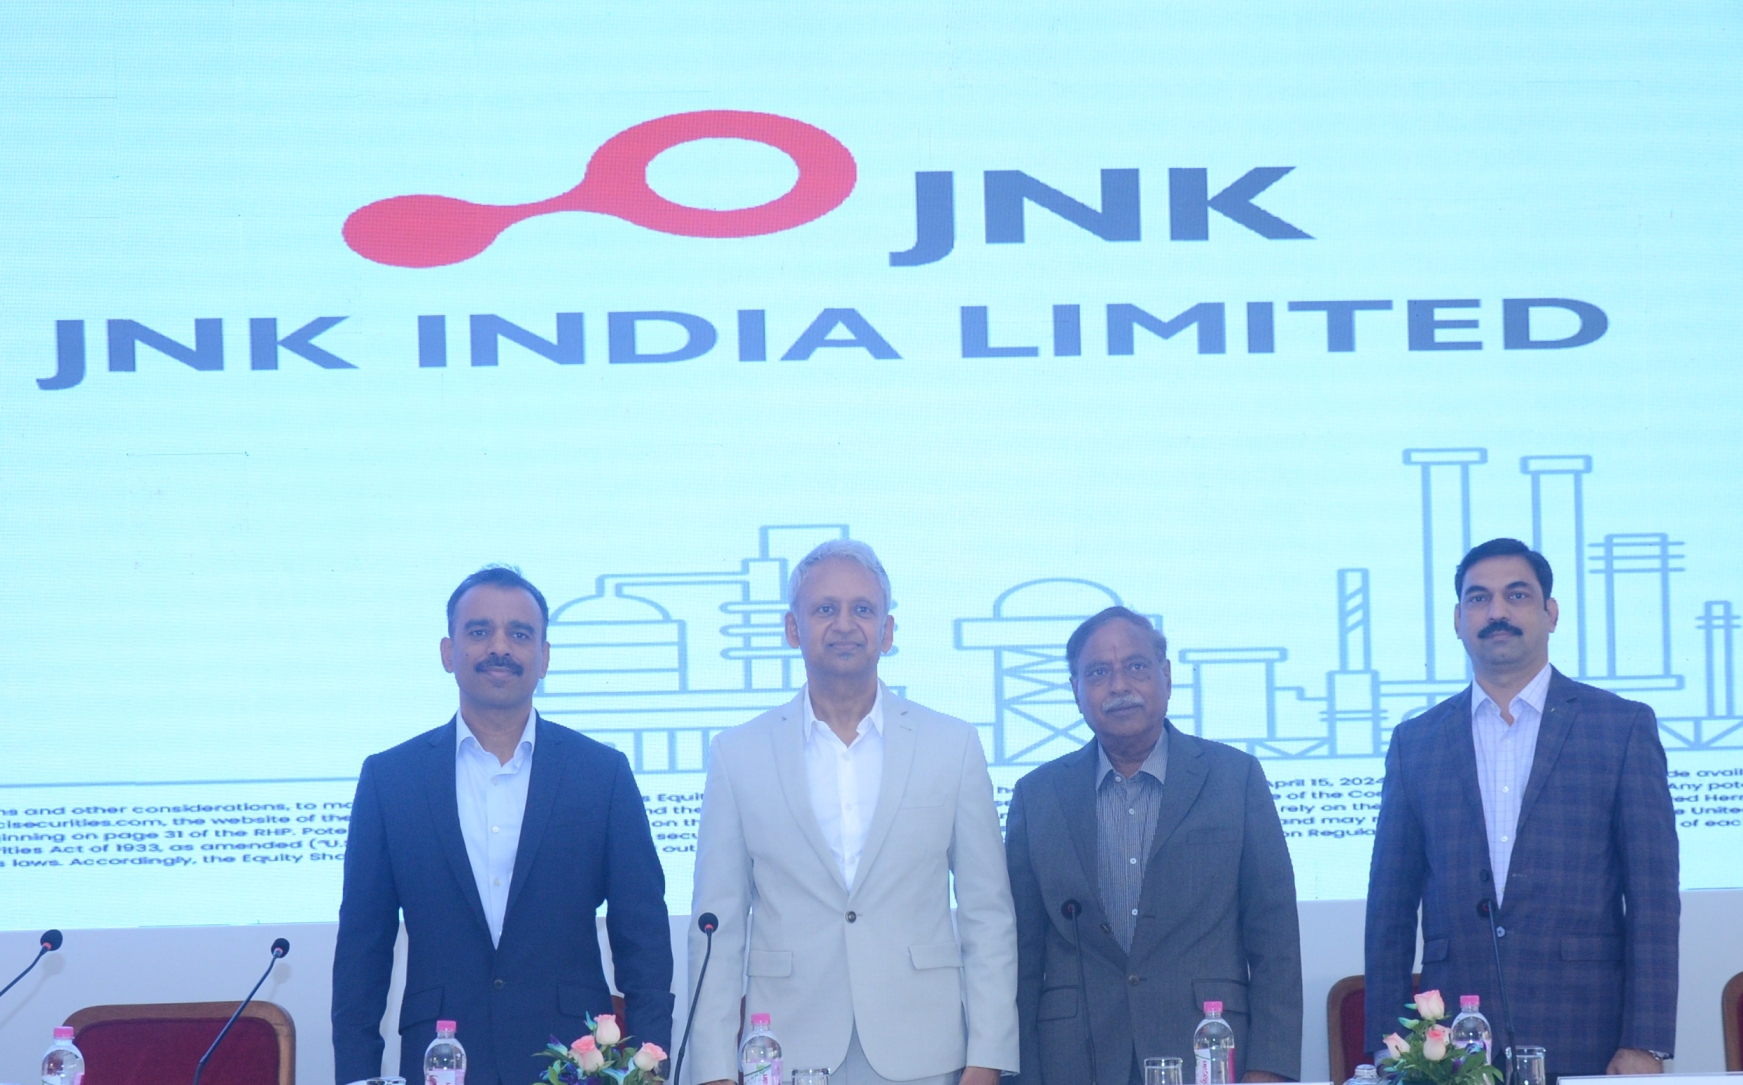 JNK India Limited’s IPO to open on April 23rd